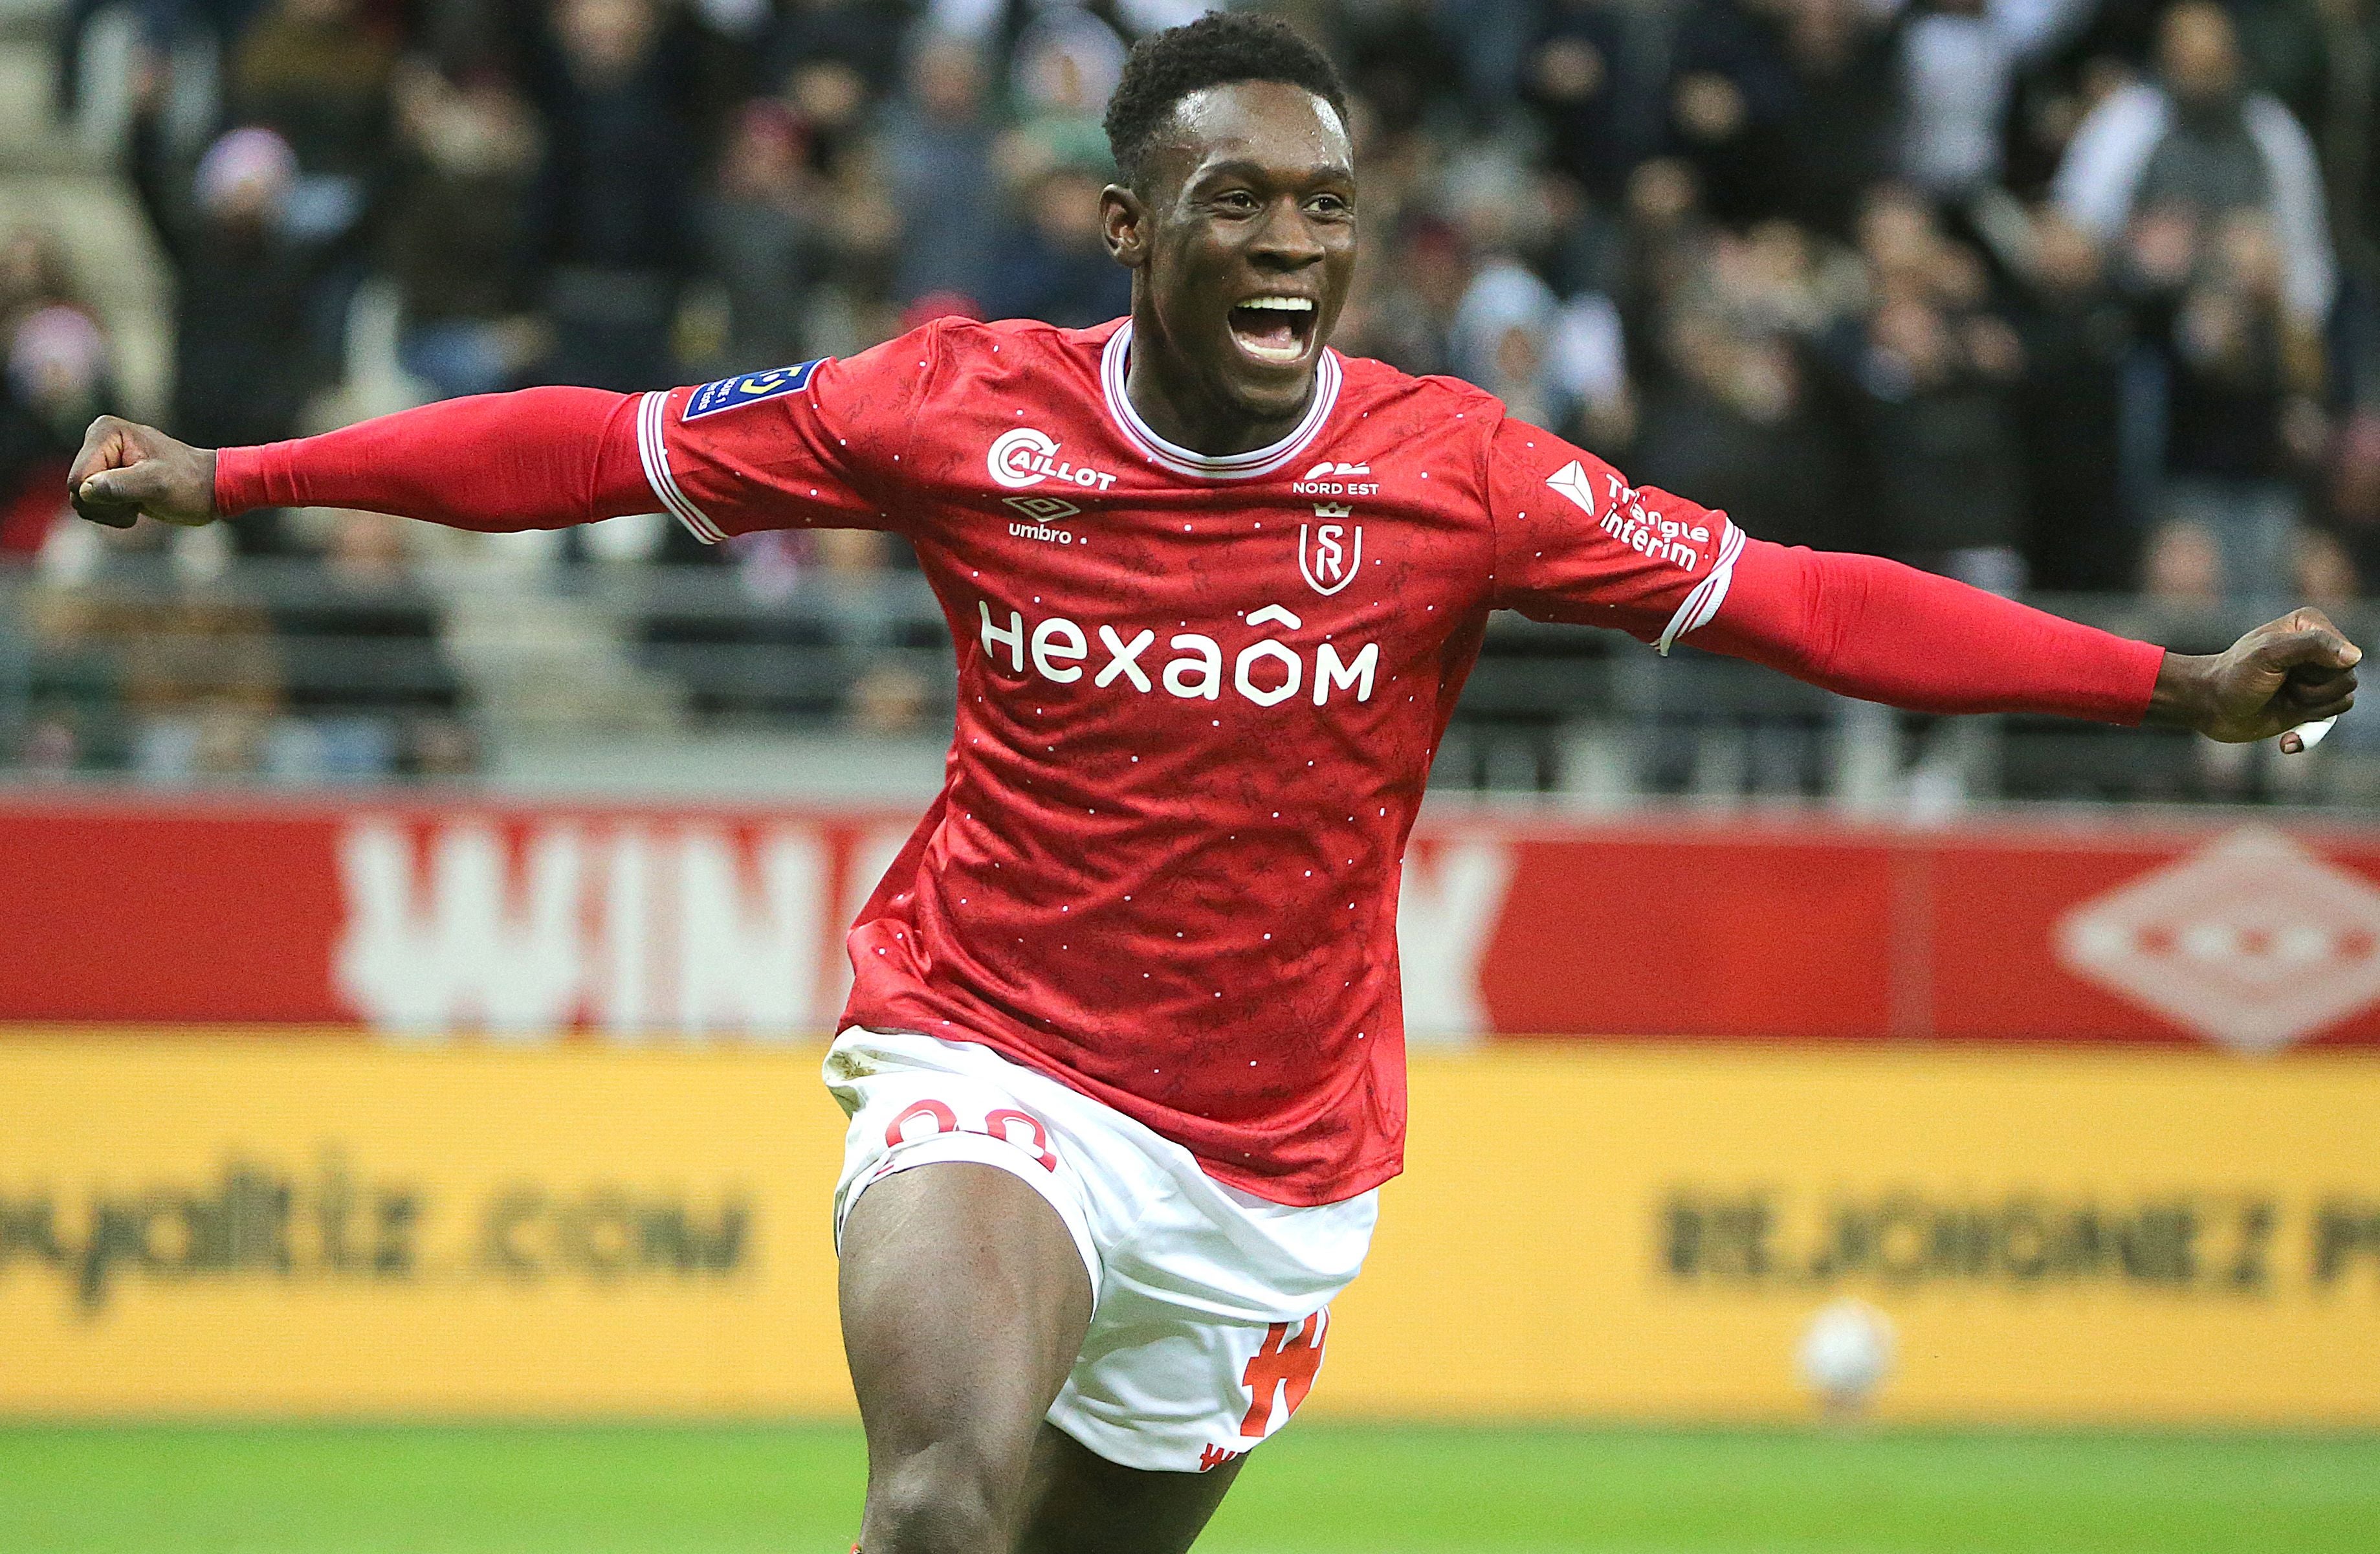 Monaco have yet to agree a price with Arsenal but are close to a deal for Folarin Balogun